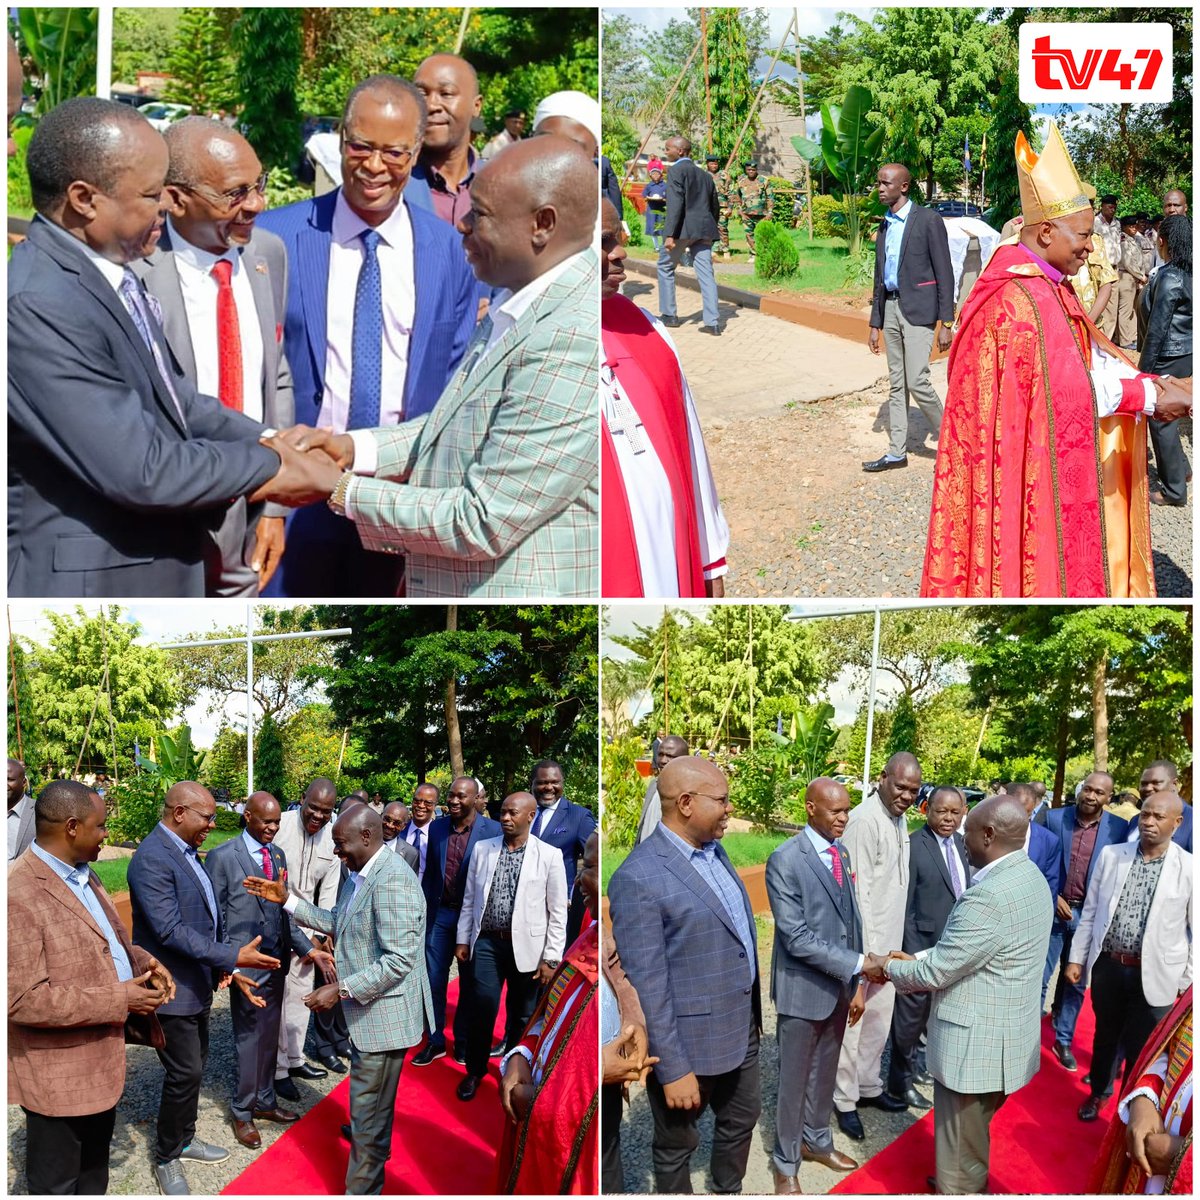 Deputy President Rigathi Gachagua attends consecration of Venerable John kimani Nthiga to Anglican Church Mbeere Diocesan assistant Bishop. ACK arkbisshop Jackson Olesapit and Mbeere Diocese Bishop led the function that was attended by 13 ACK Bishops and hundreds of worshipers.